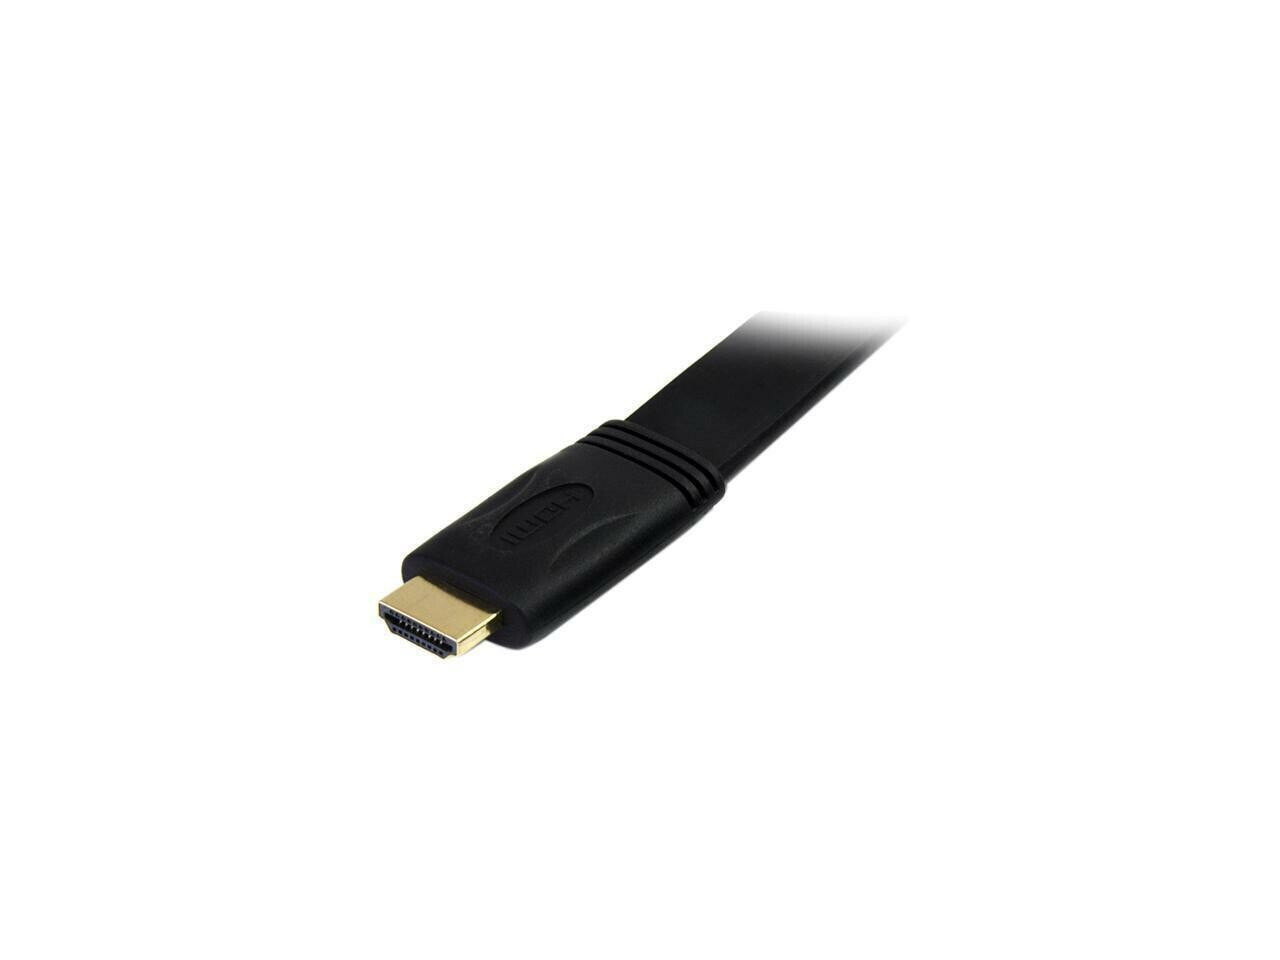 StarTech.com HDMIMM6FL 6 ft. Black Flat High Speed HDMI Cable with Ethernet Male